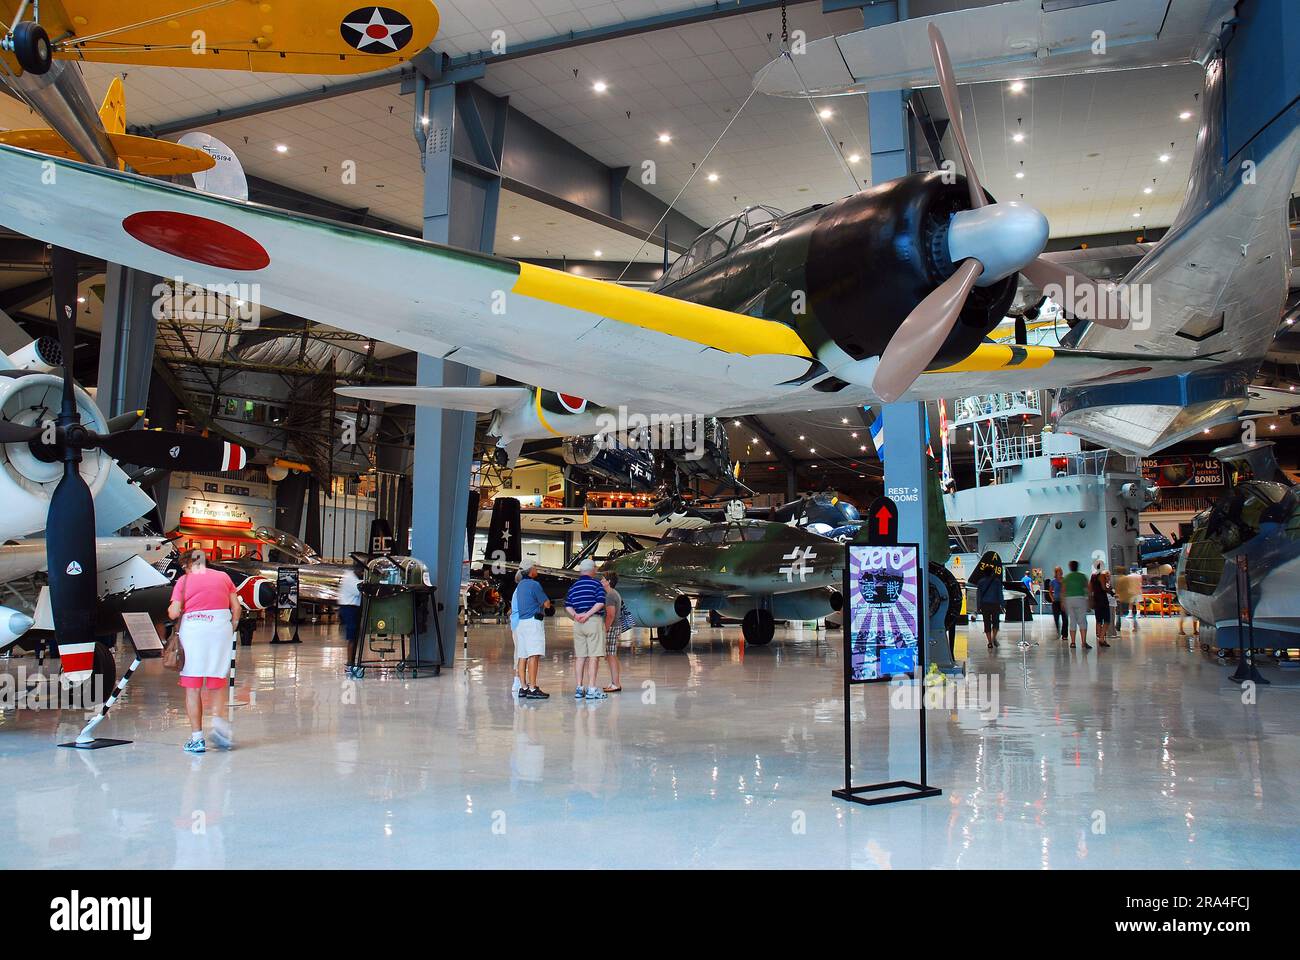 A Japanese Mitsubishi Zero and German World War II era airplanes are on display at the Naval Air Museum in Pensacola, Florida Stock Photo